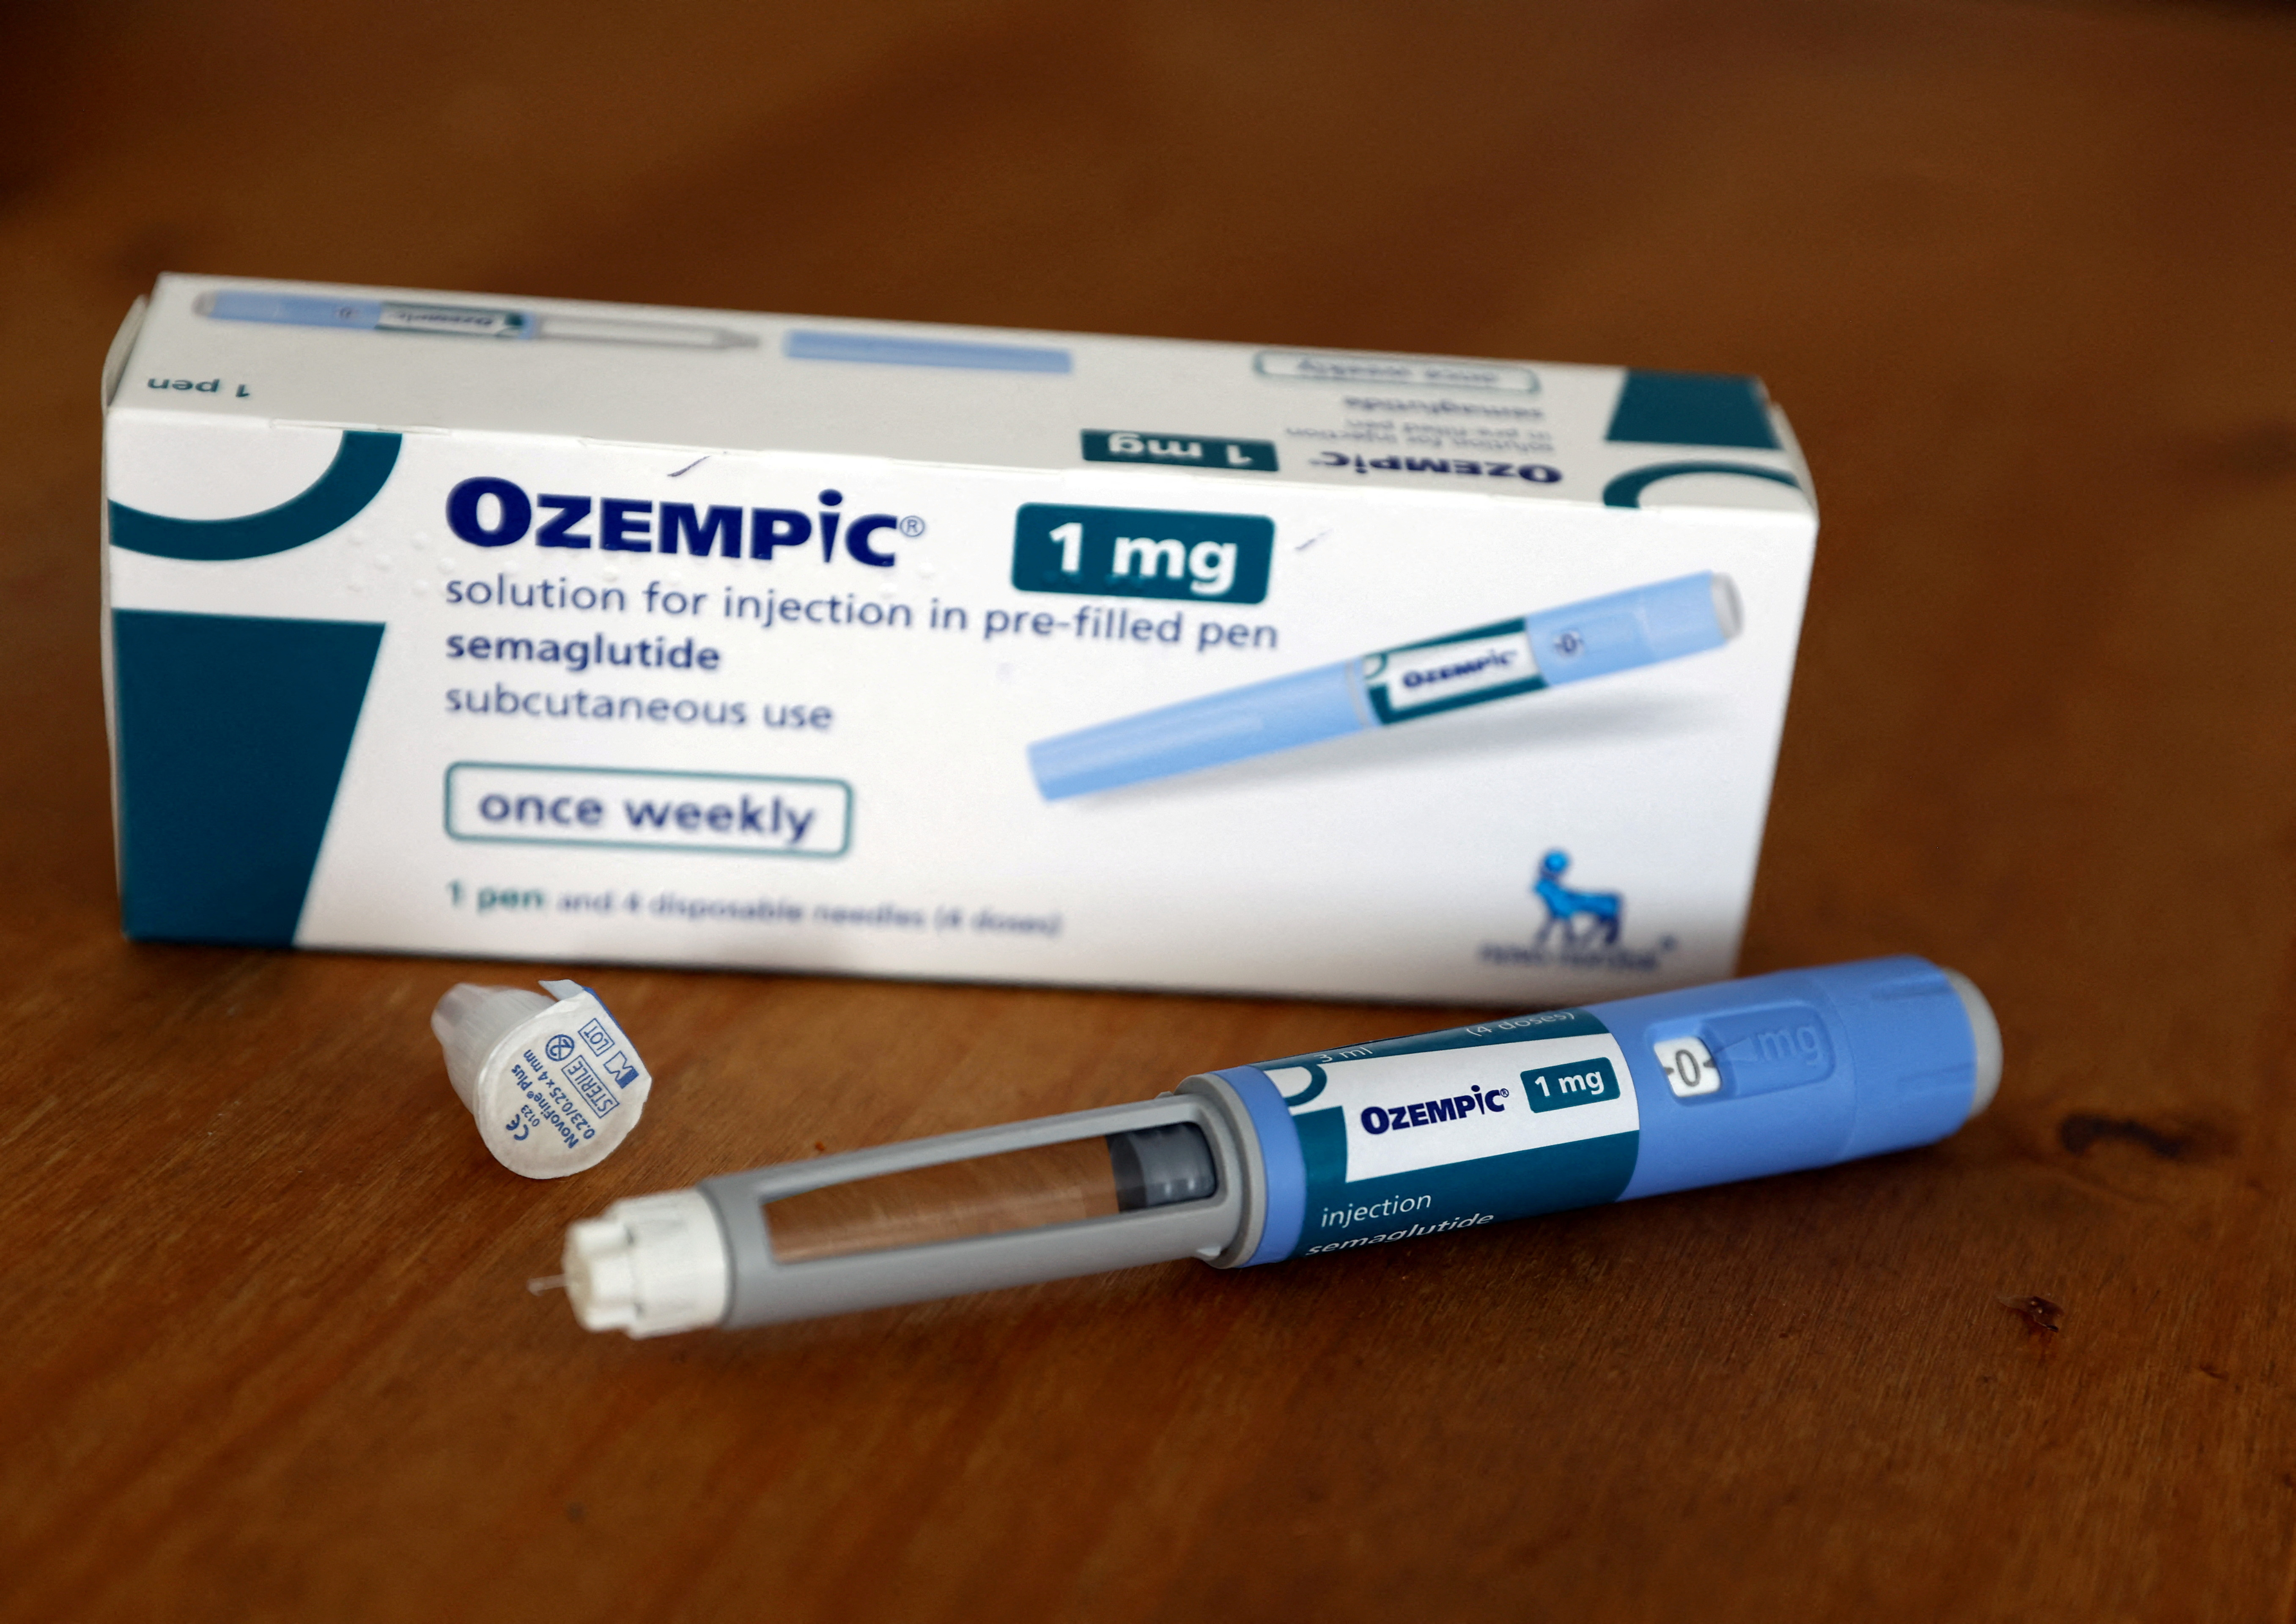 Fake Ozempic pens found to contain insulin concerning health officials